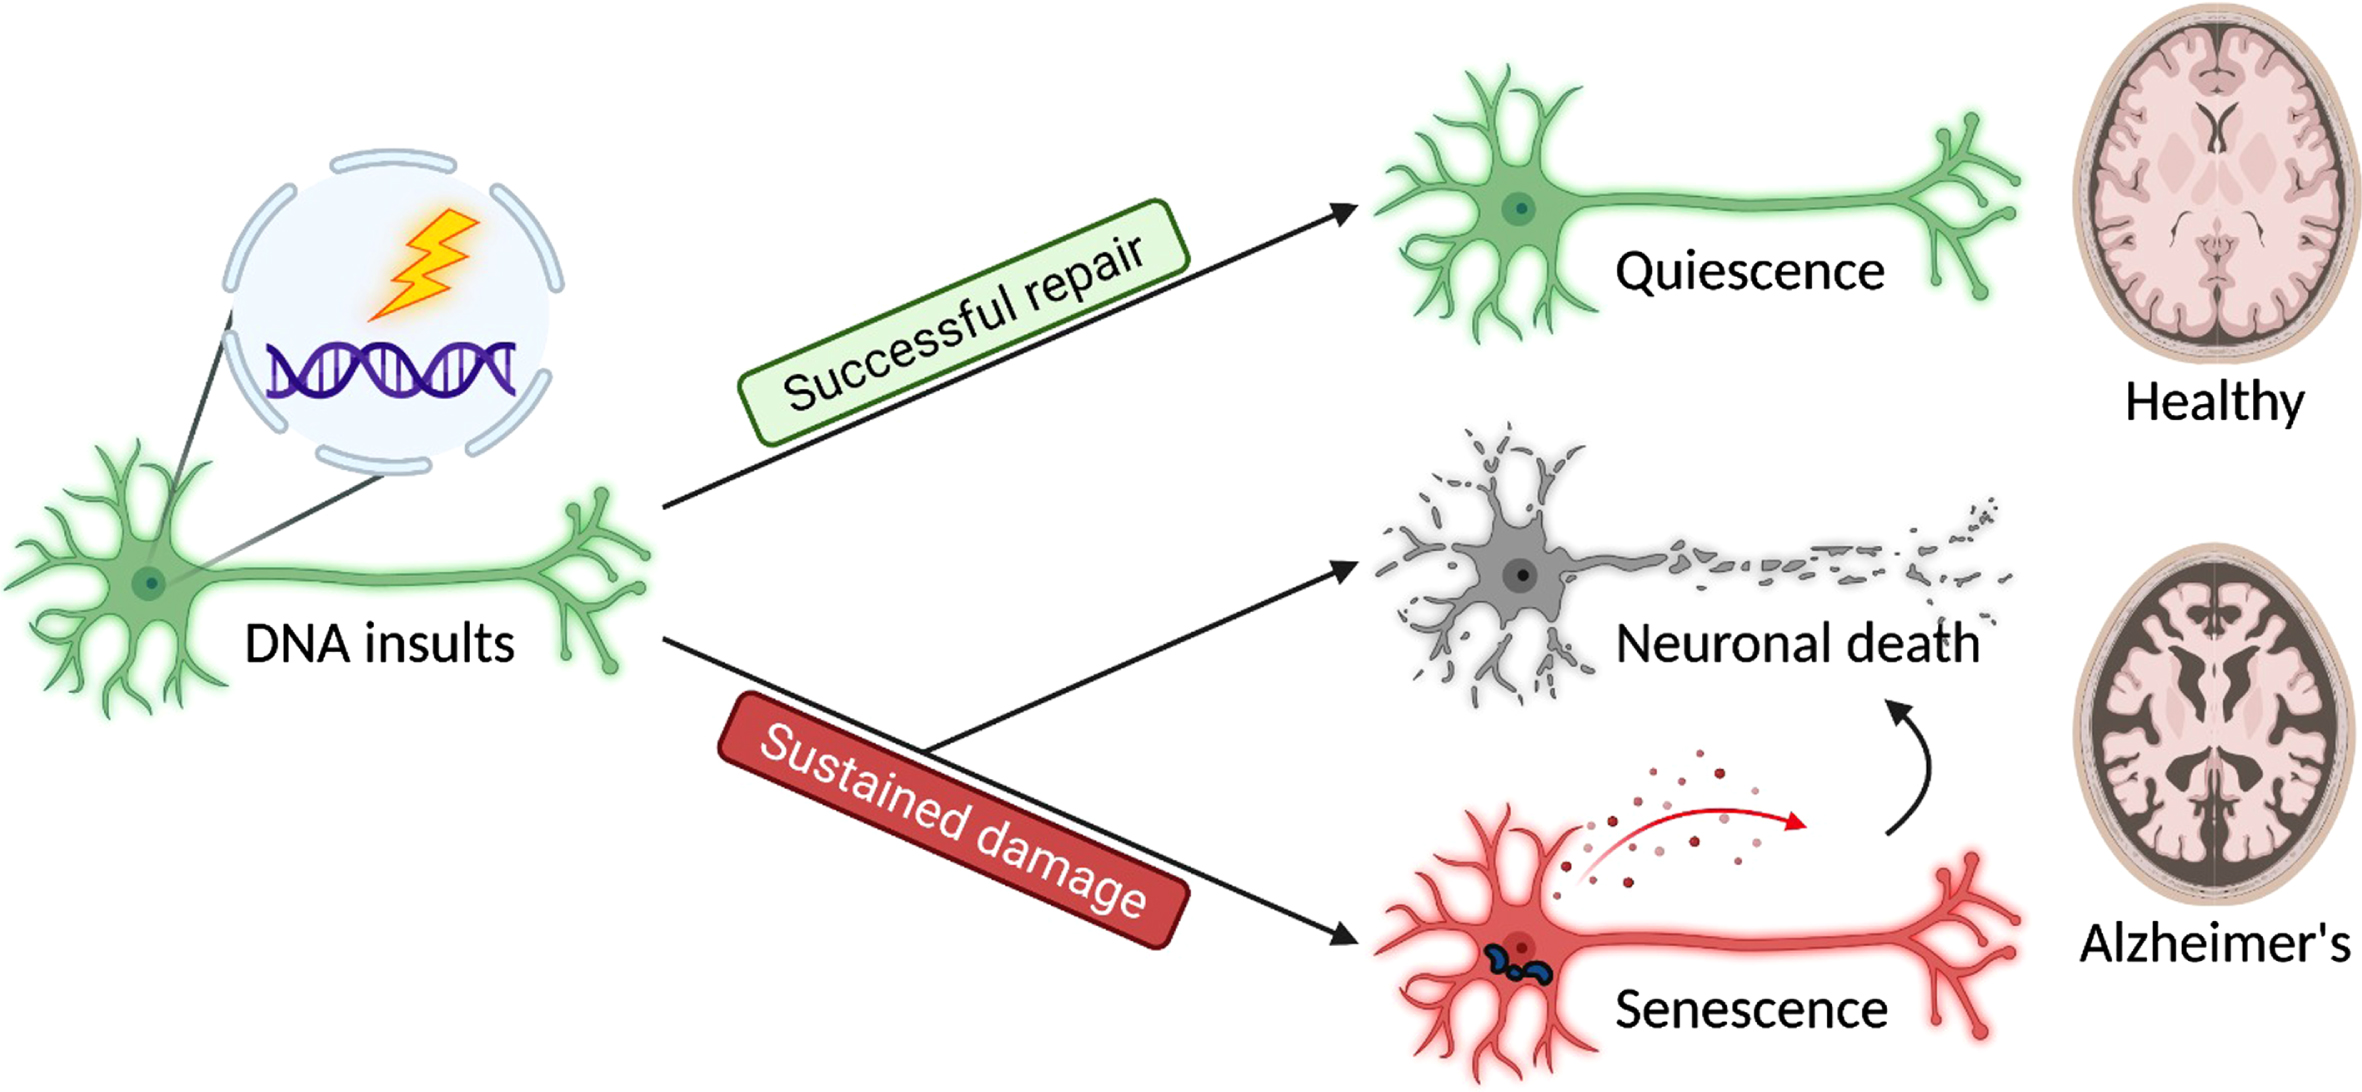 Three major cell fates are found in terminally differentiated neurons in response to DNA insults. Successful repair results in a quiescent outcome, and the neurons maintain their normal physiology as a part of a healthy brain. In contrast, sustained damage resulted from unsuccessful repair or unattended lesions may lead to neuronal death and senescence, contributing to brain aging and disease pathogenesis.